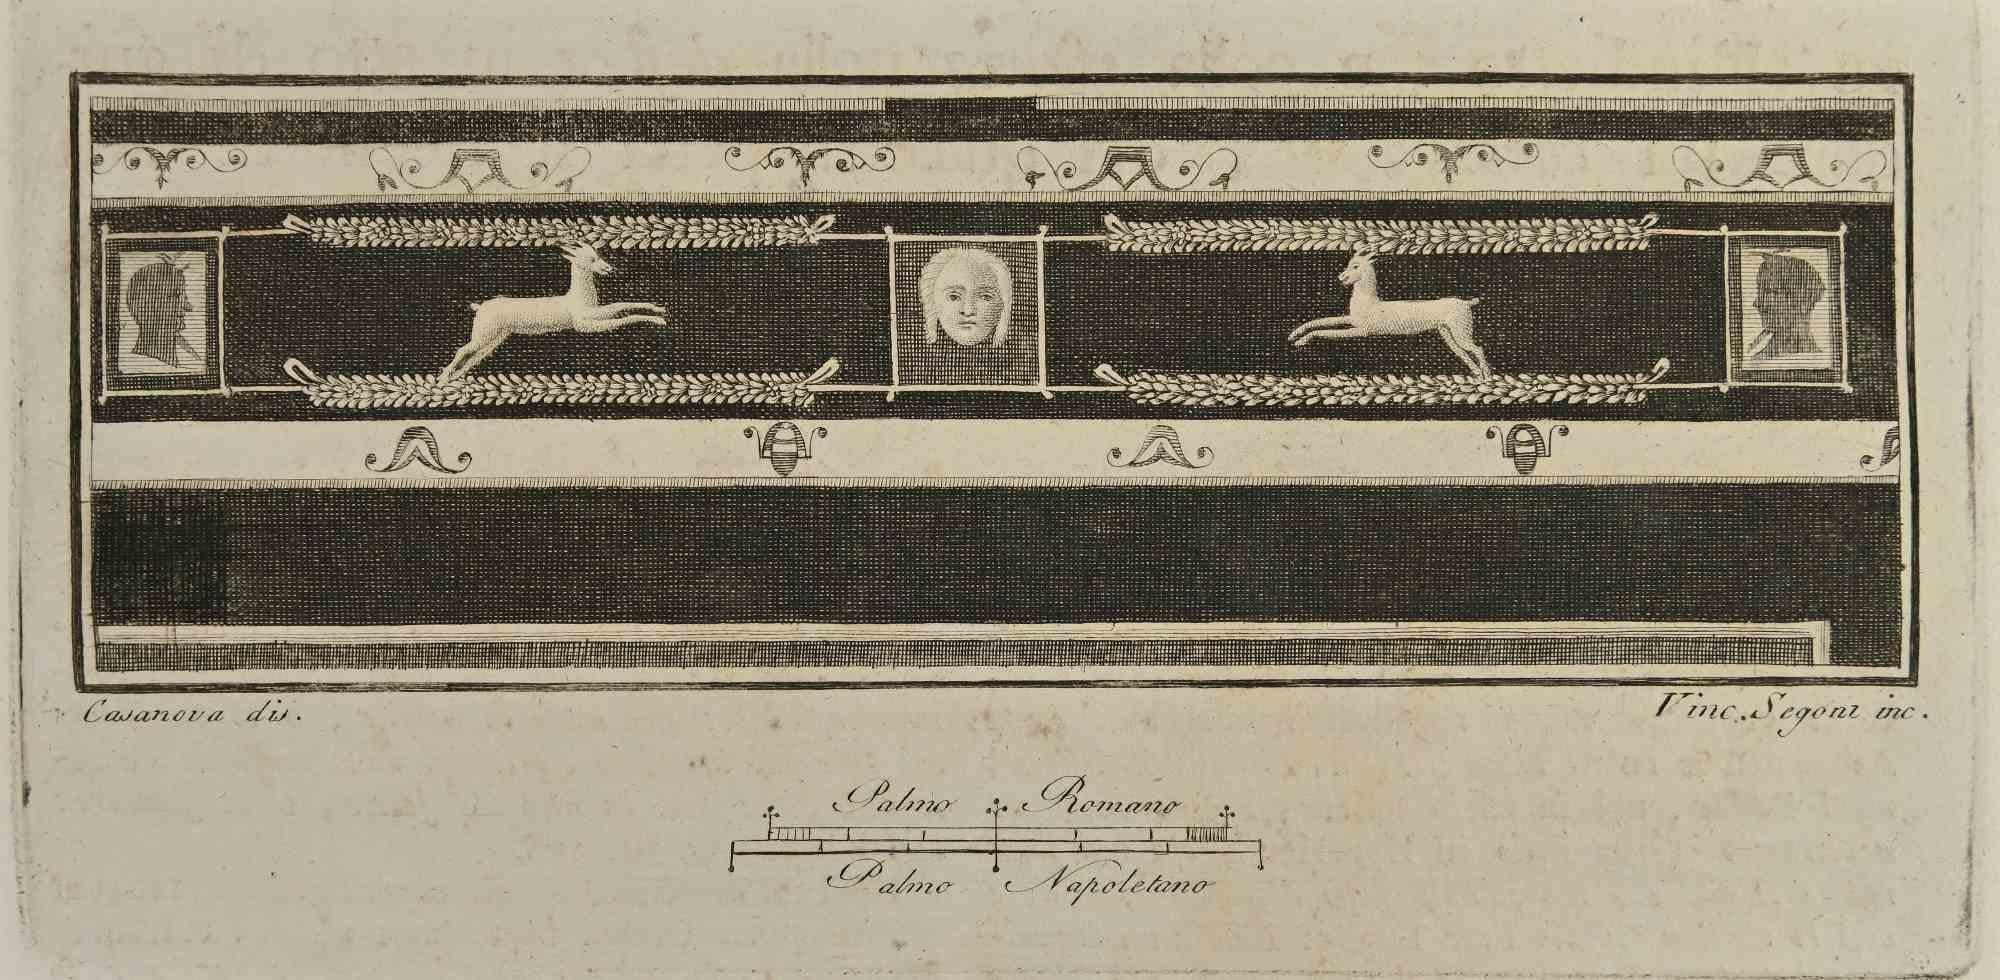 Ornamental Pompeian Style from "Antiquities of Herculaneum" is an etching on paper realized by Vincenzo Segoni in the 18th Century.

Signed on the plate.

Good conditions and aged.

The etching belongs to the print suite “Antiquities of Herculaneum